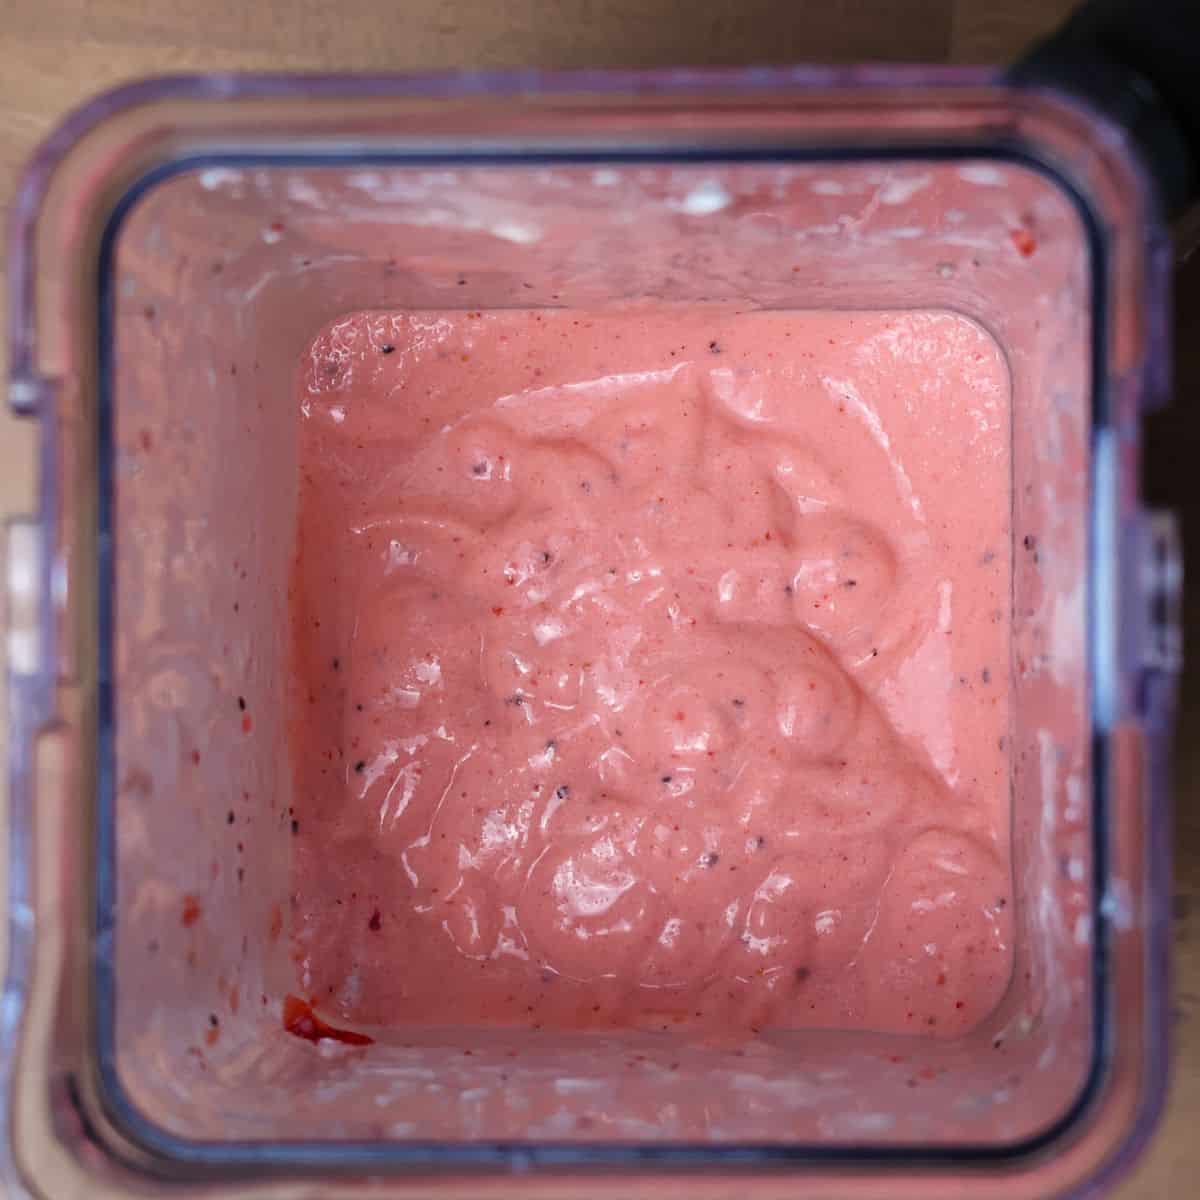 Top-down view of the final blended kiwi quencher in the blender, showing a smooth, creamy texture with specks of kiwi and strawberry seeds.